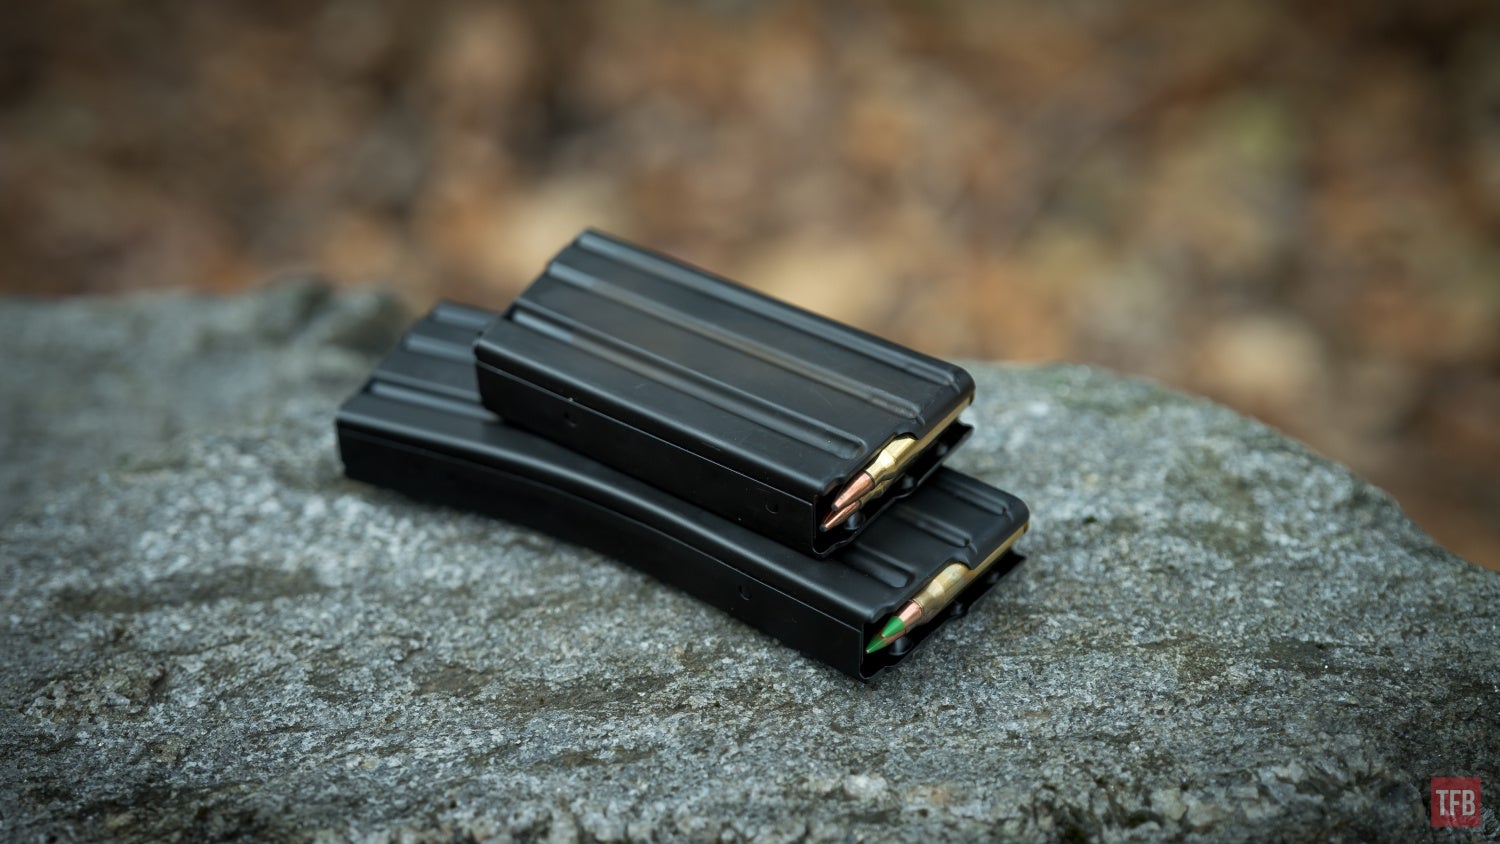 Now Is The Time: Stock Up On AR-15 DURAMAG Magazines